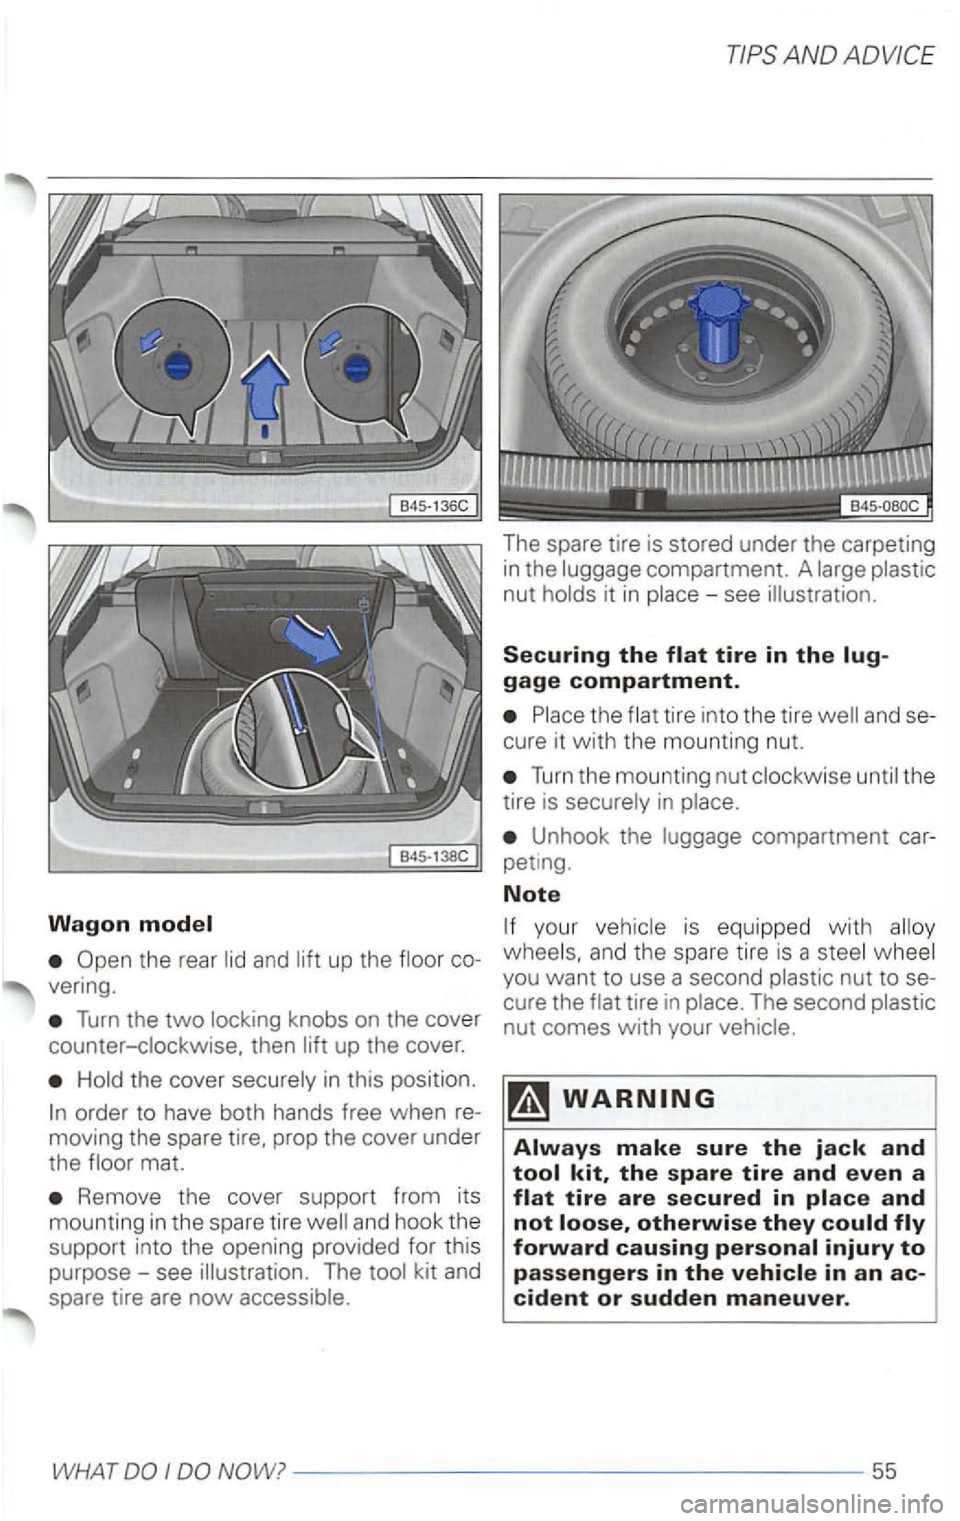 VOLKSWAGEN PASSAT 1998  Owners Manual Wagon model 
the  rear  lid and lift up the  floor 
vering. 
Turn the two locking  knobs on the  cover 
counter-clockwise.  then lift up  the  cover. 
Hold  th e  cover  securely  in this  position. 
